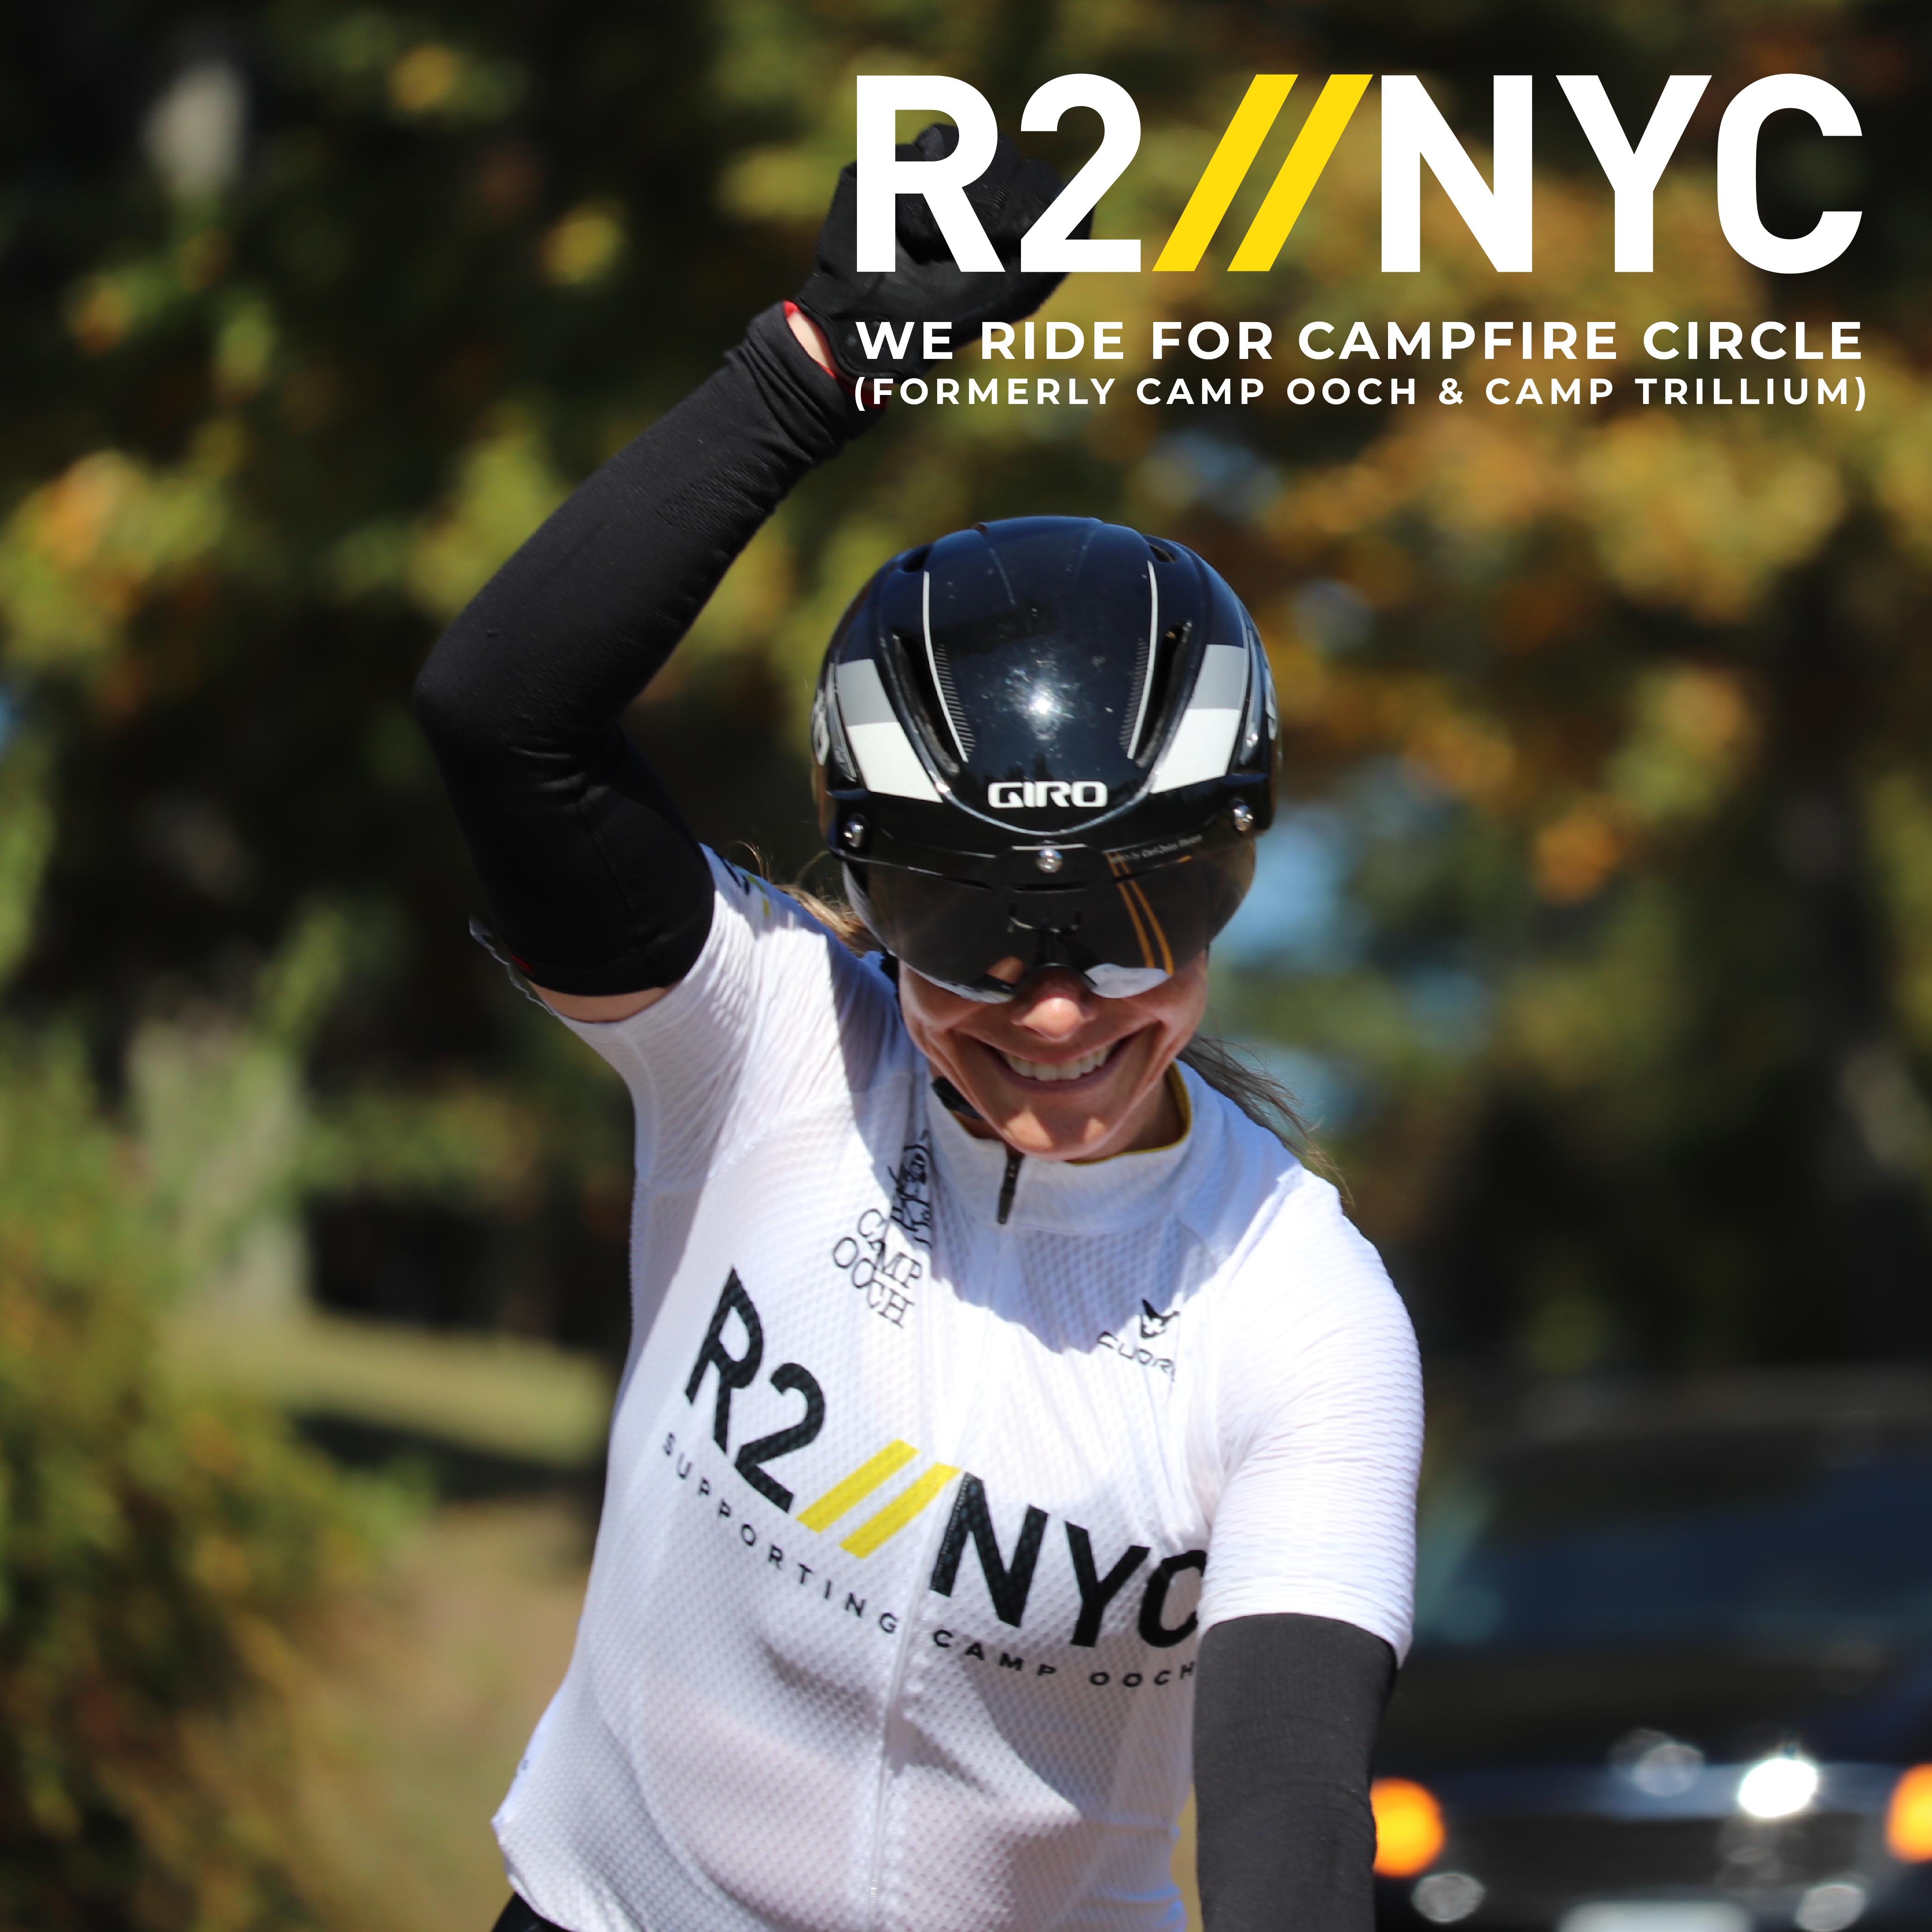 R2NYC We ride for Campfire Circle (Formerly Camp Ooch & Camp Trillium) Rider on bike, smiling with hand raised in the air and car and trees in background